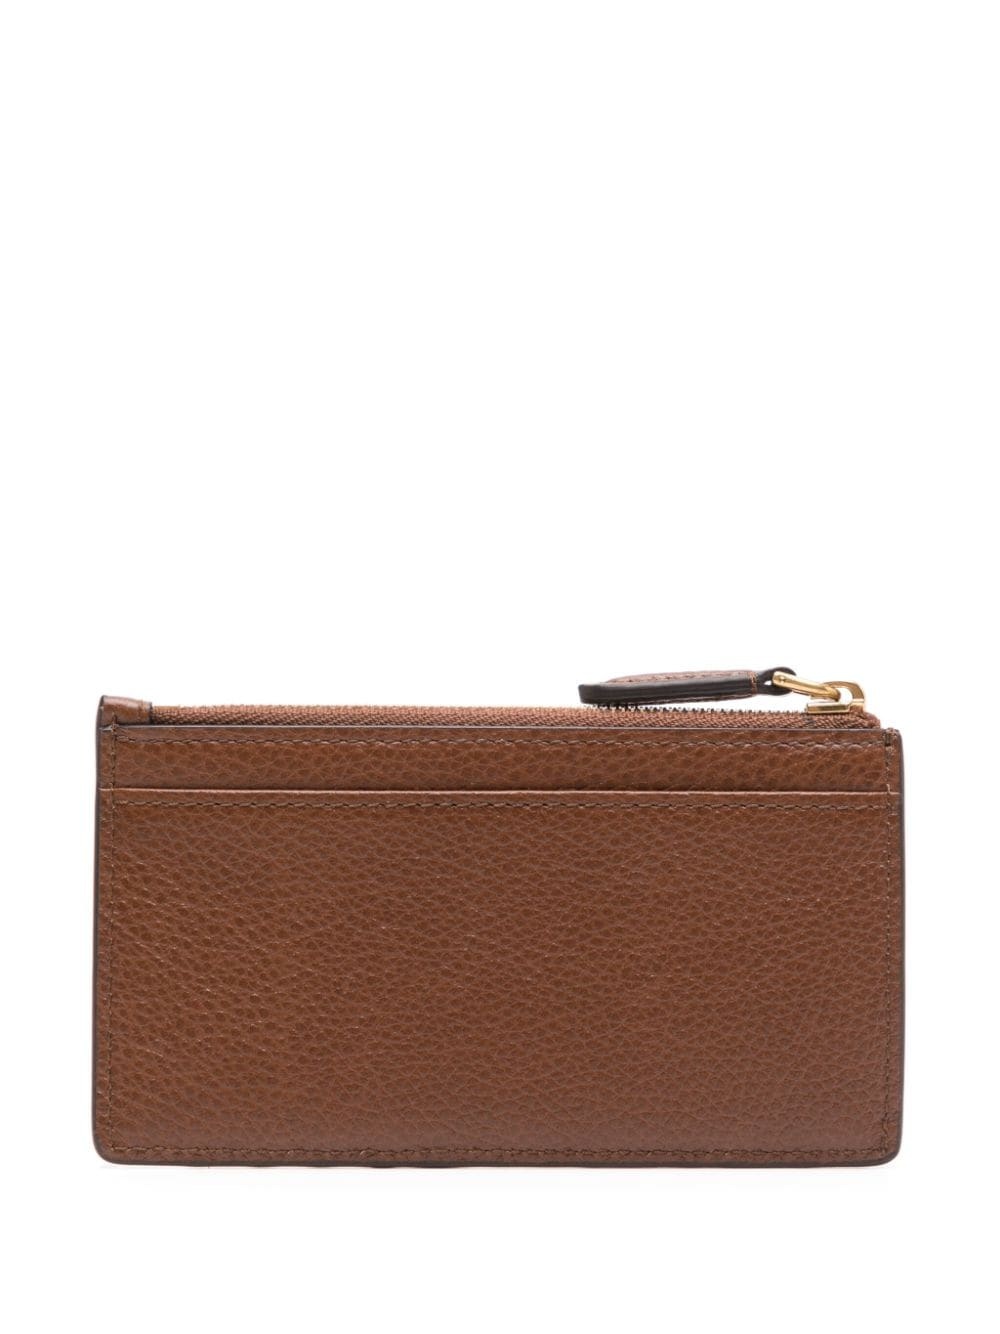 zipped leather coin pouch - 2